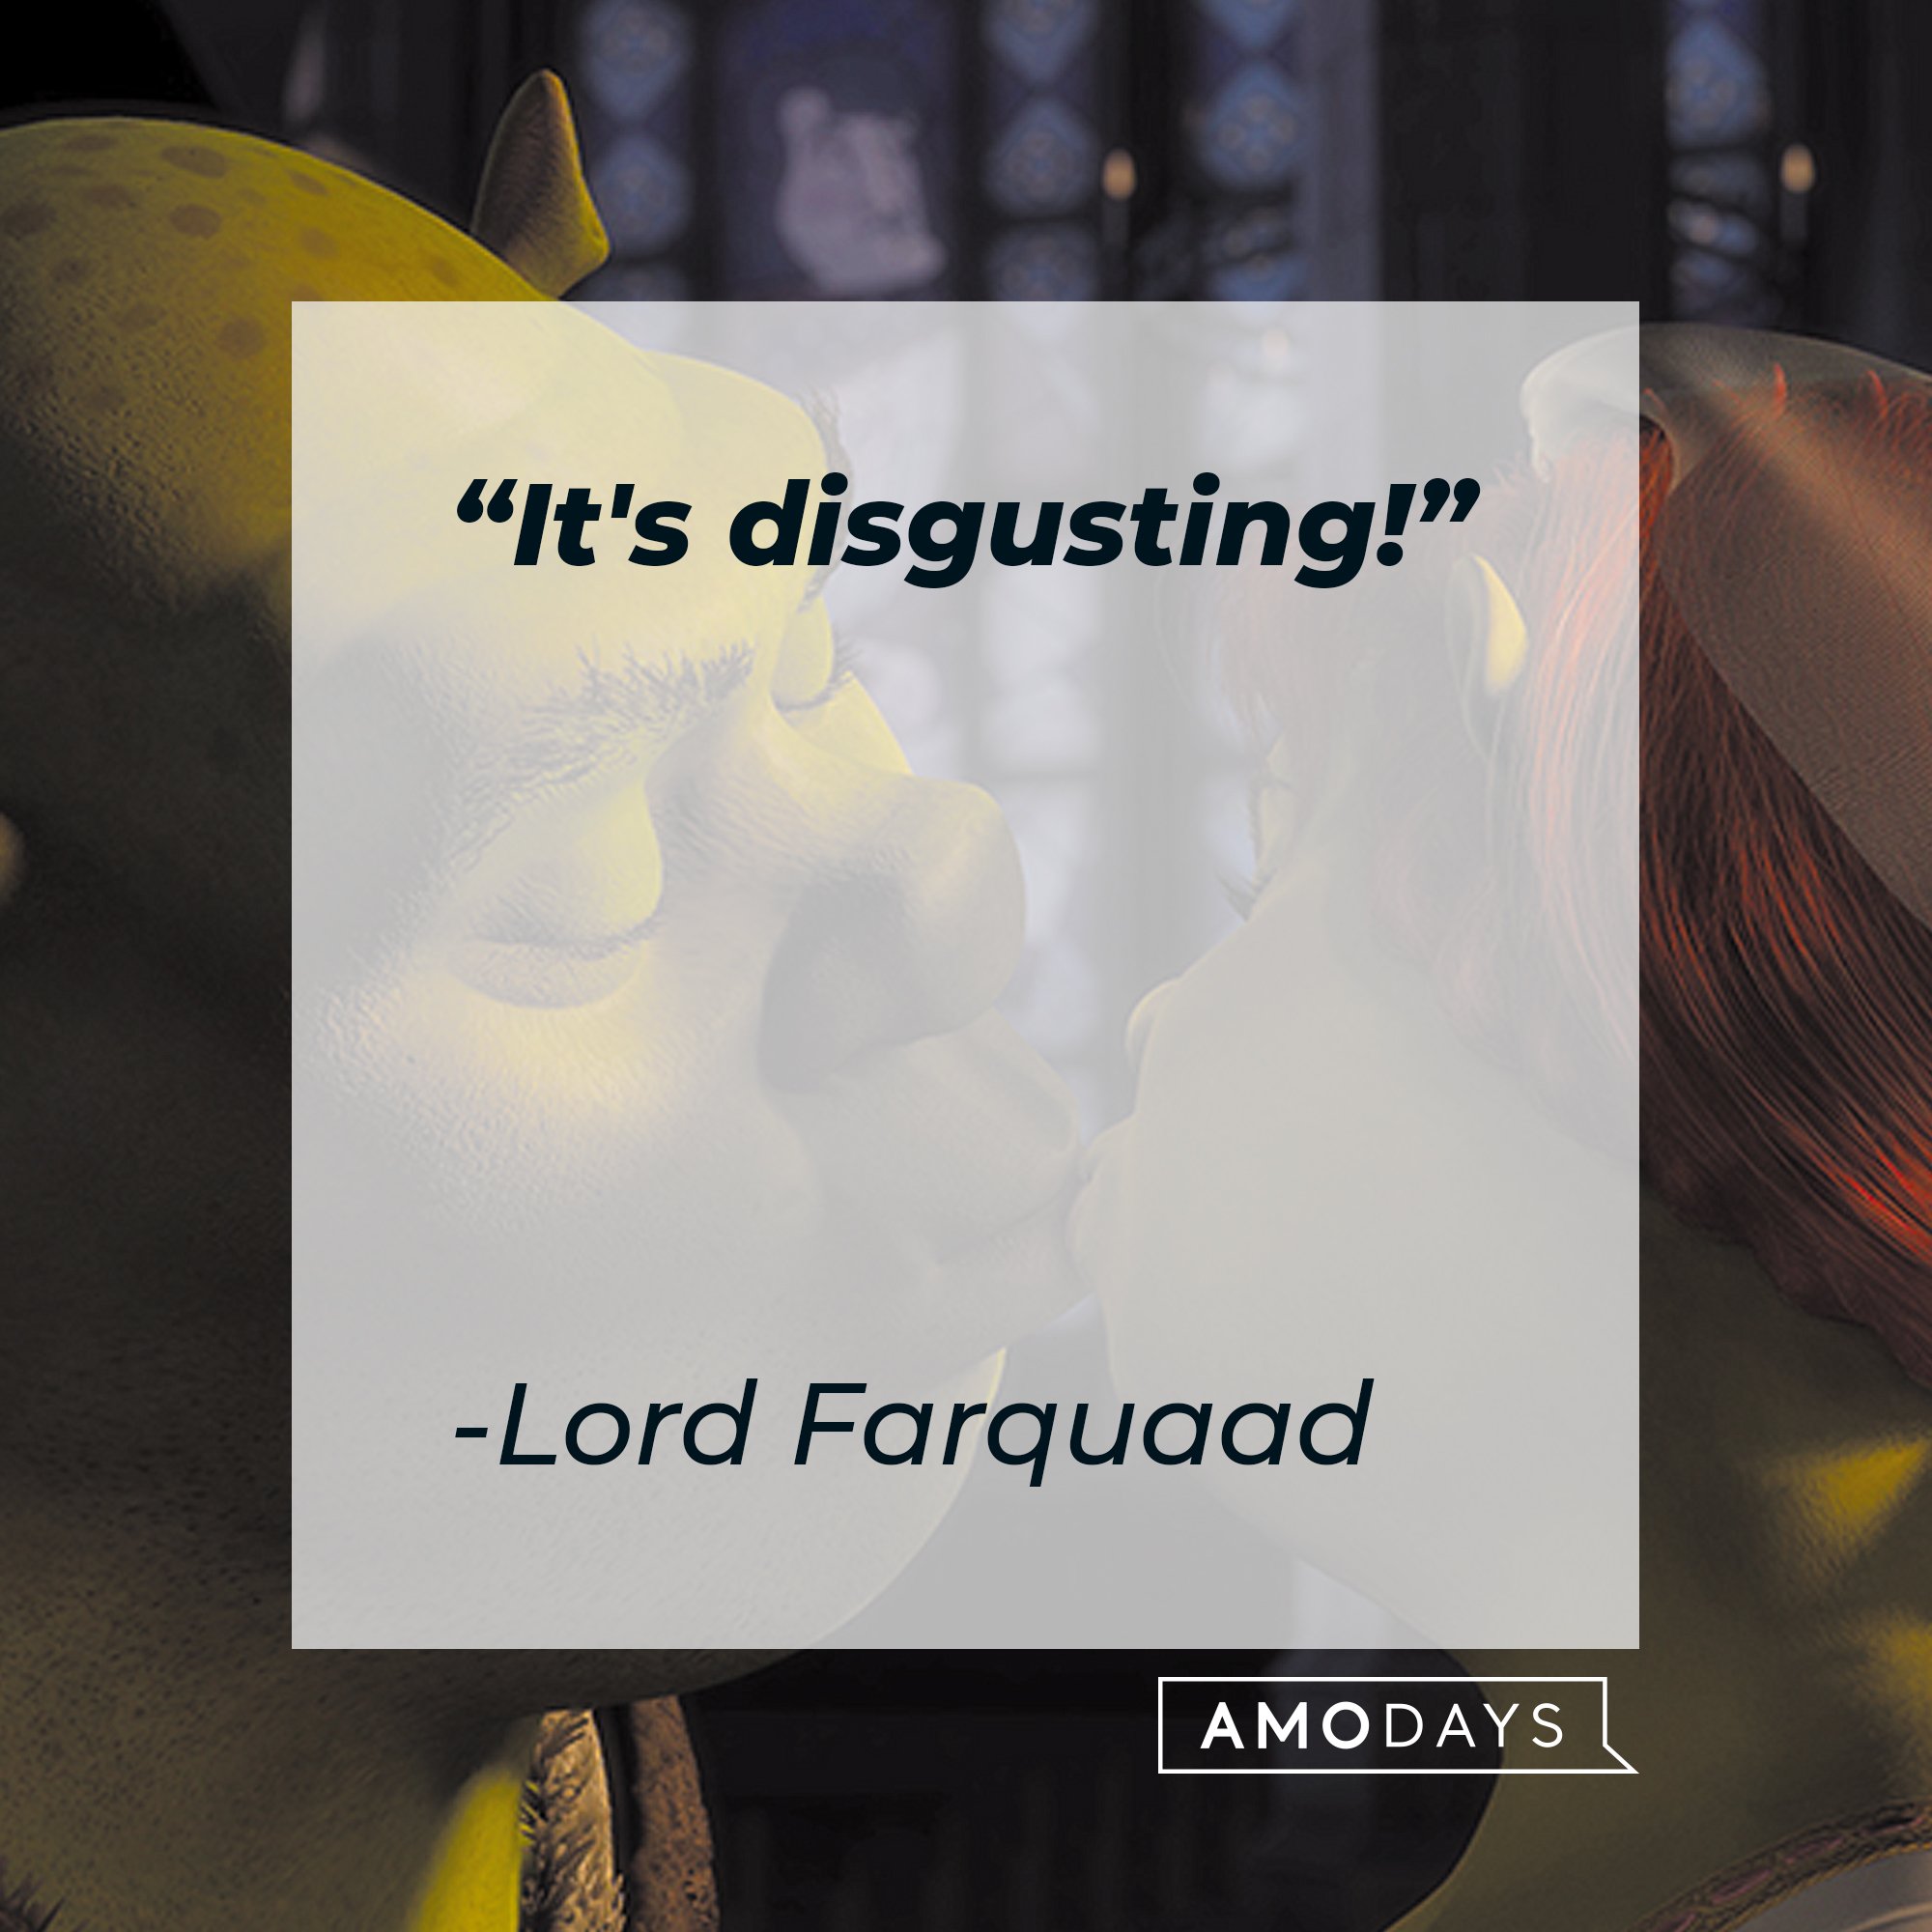 Lord Farquaad's quote: "It's disgusting!" | Image: AmoDays 